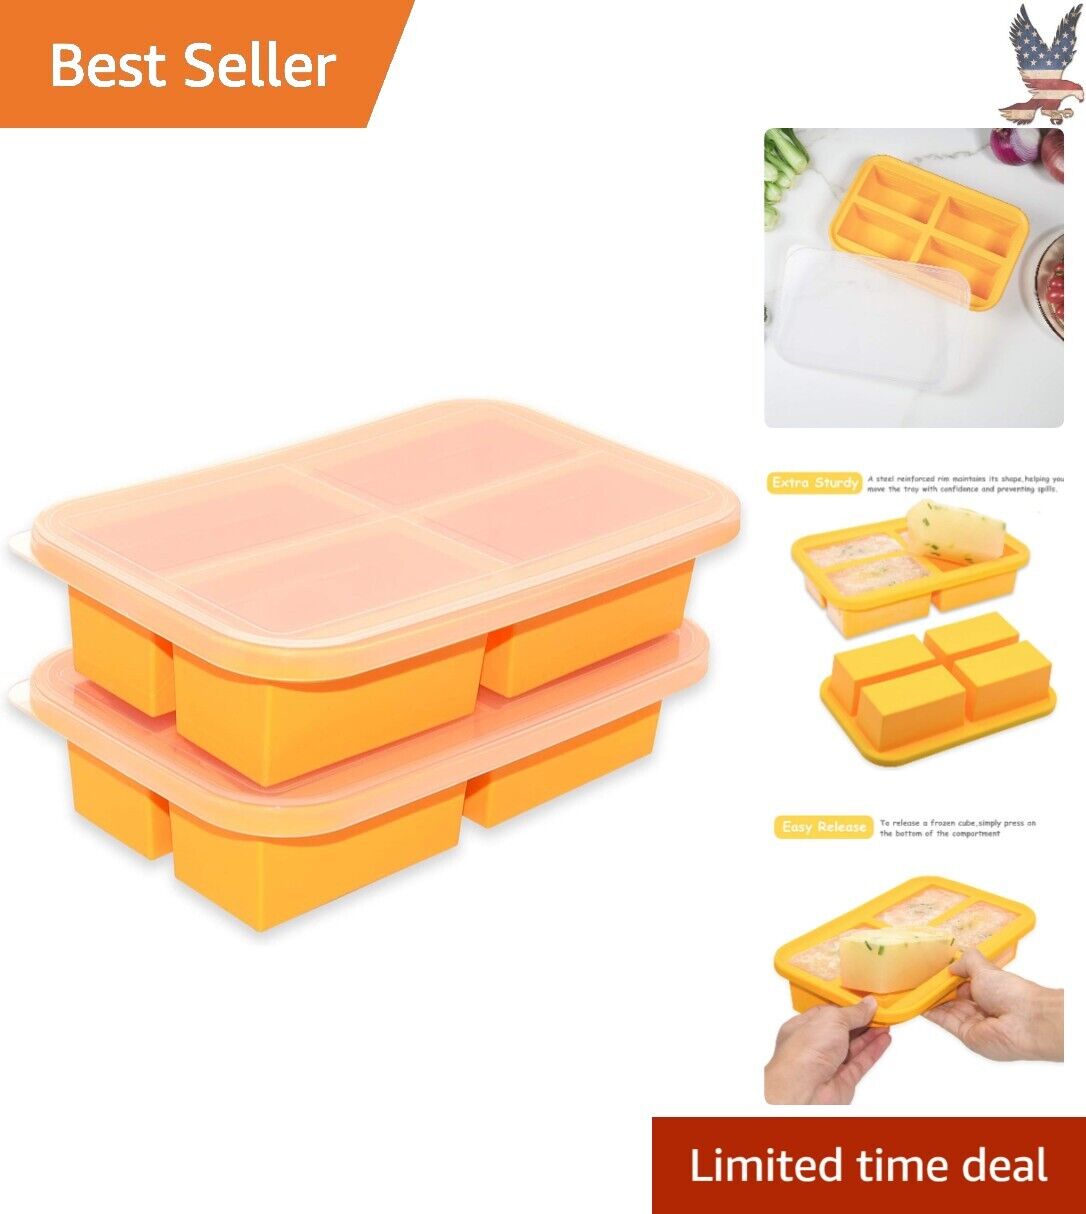 Efficient Versatile Individual Silicone Freezing Tray - 2 Pack - 1 Cup Portions